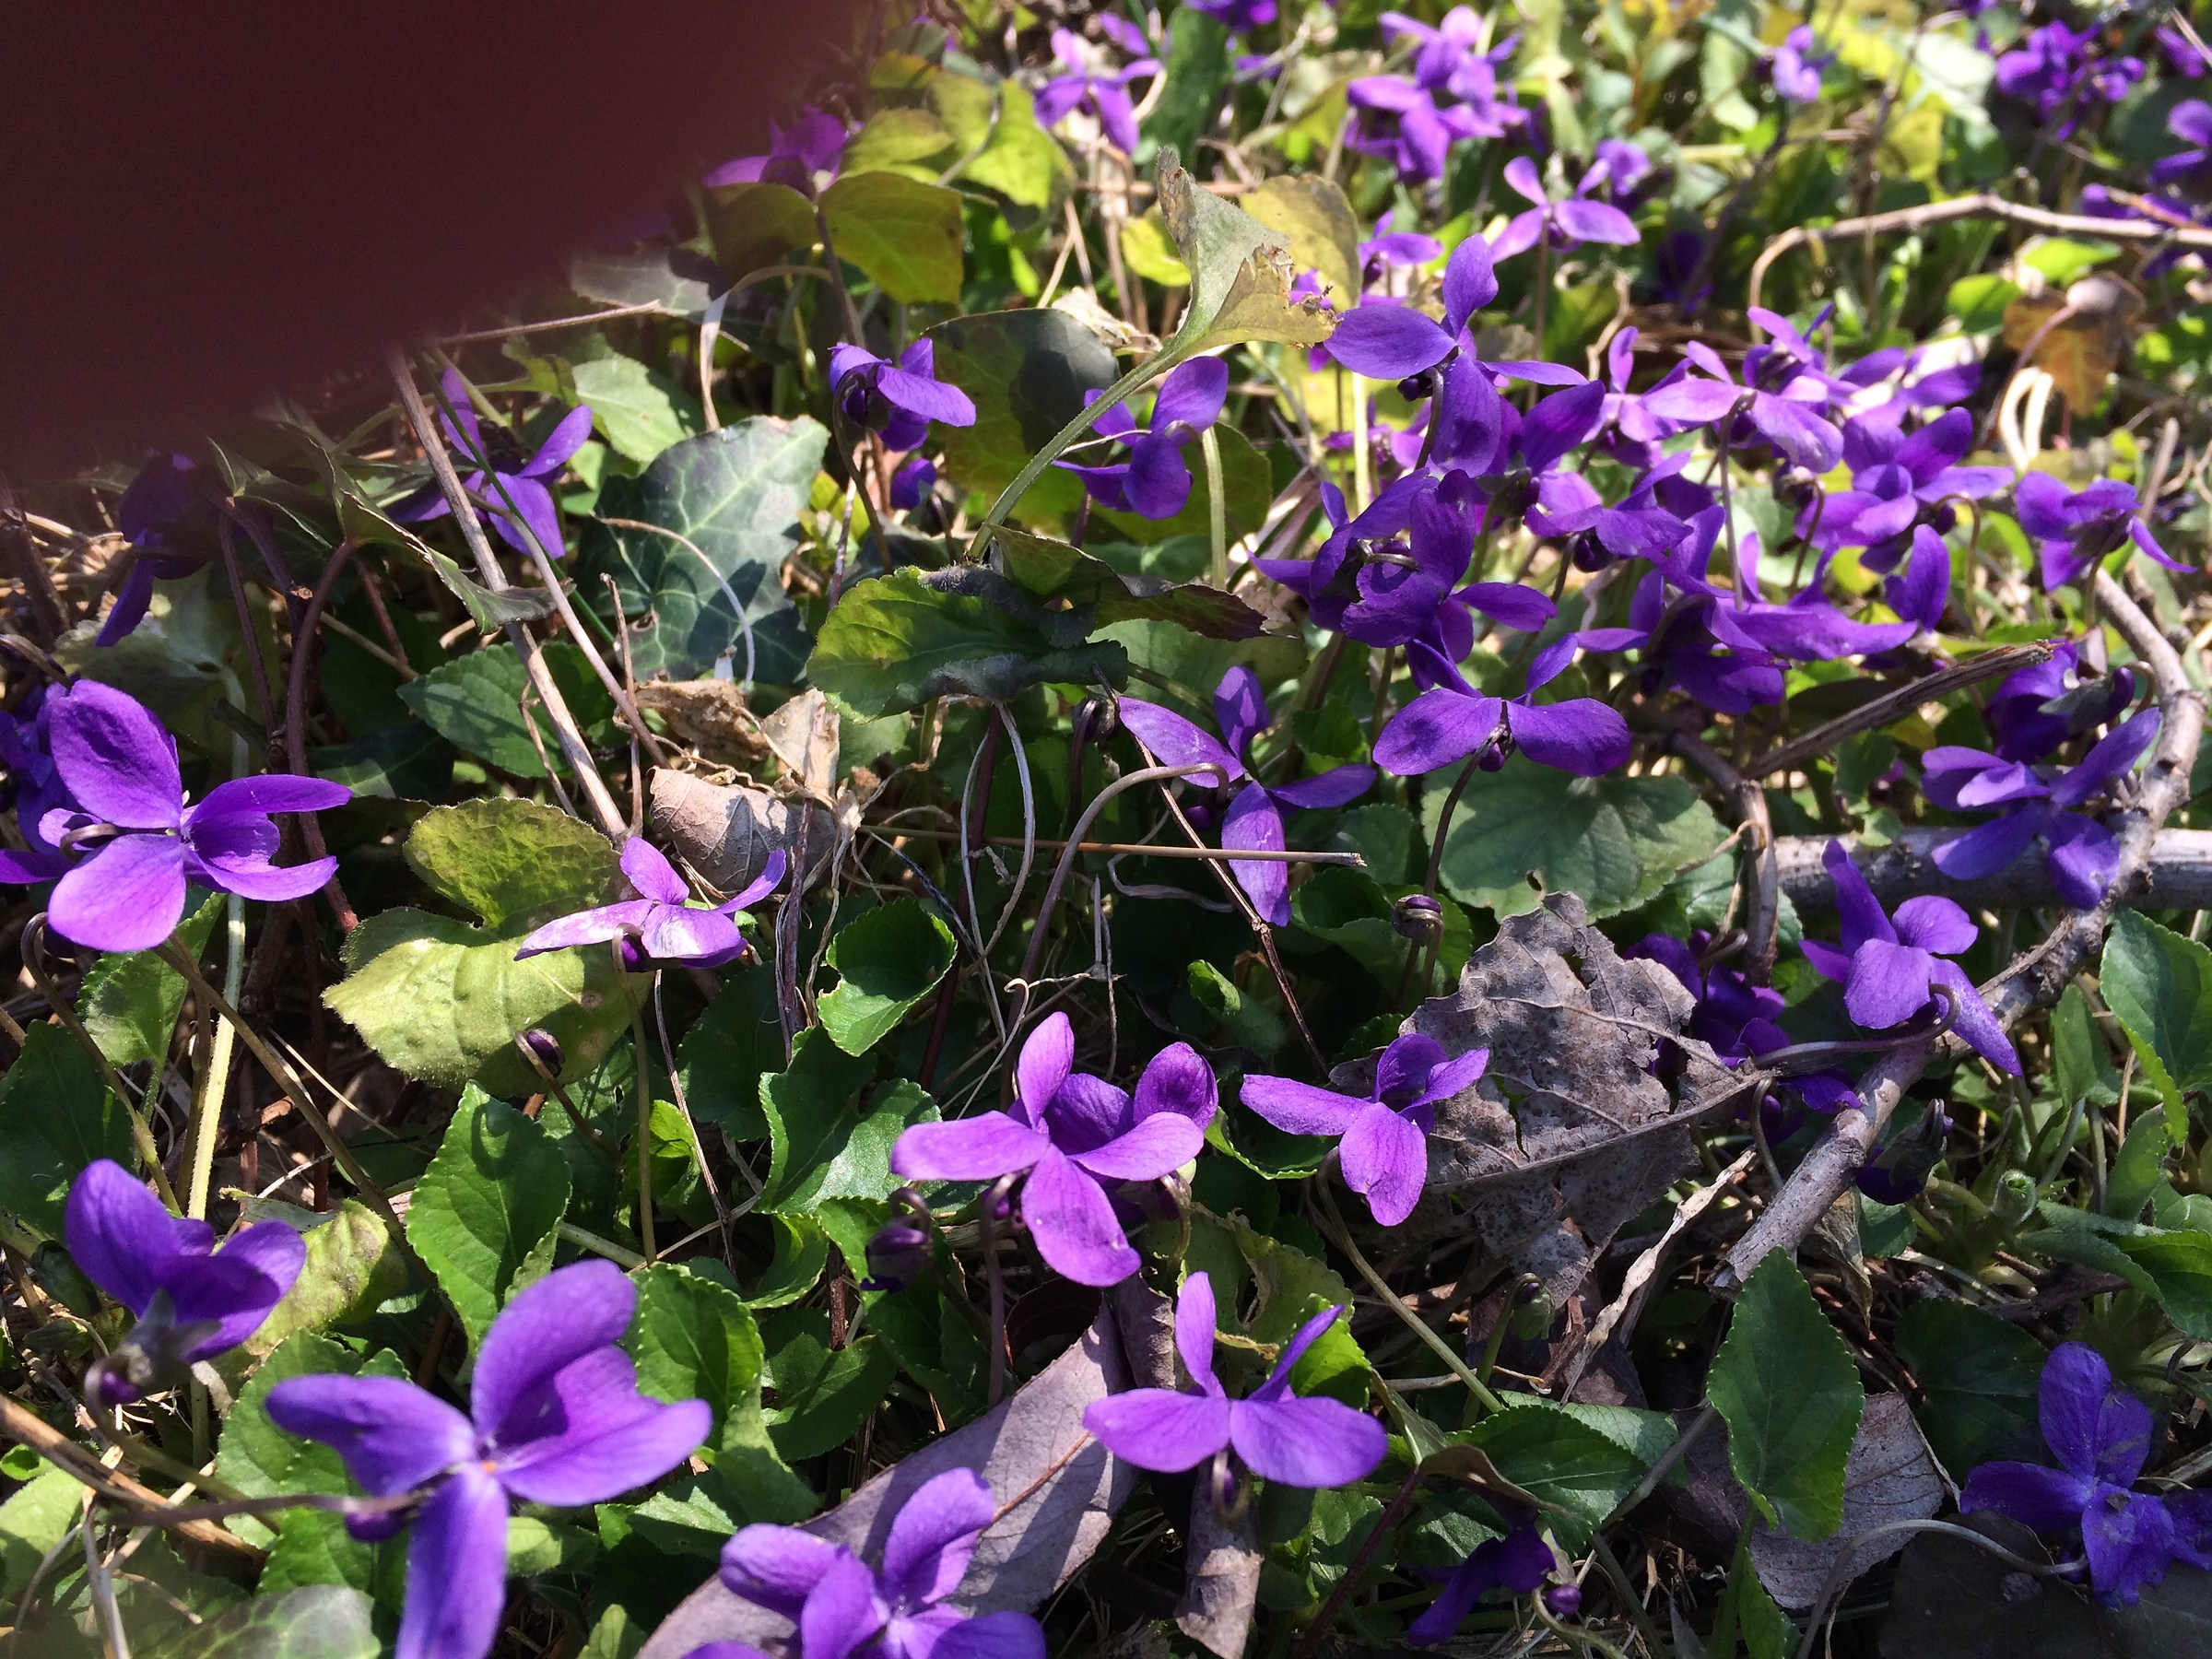 first violets in March...